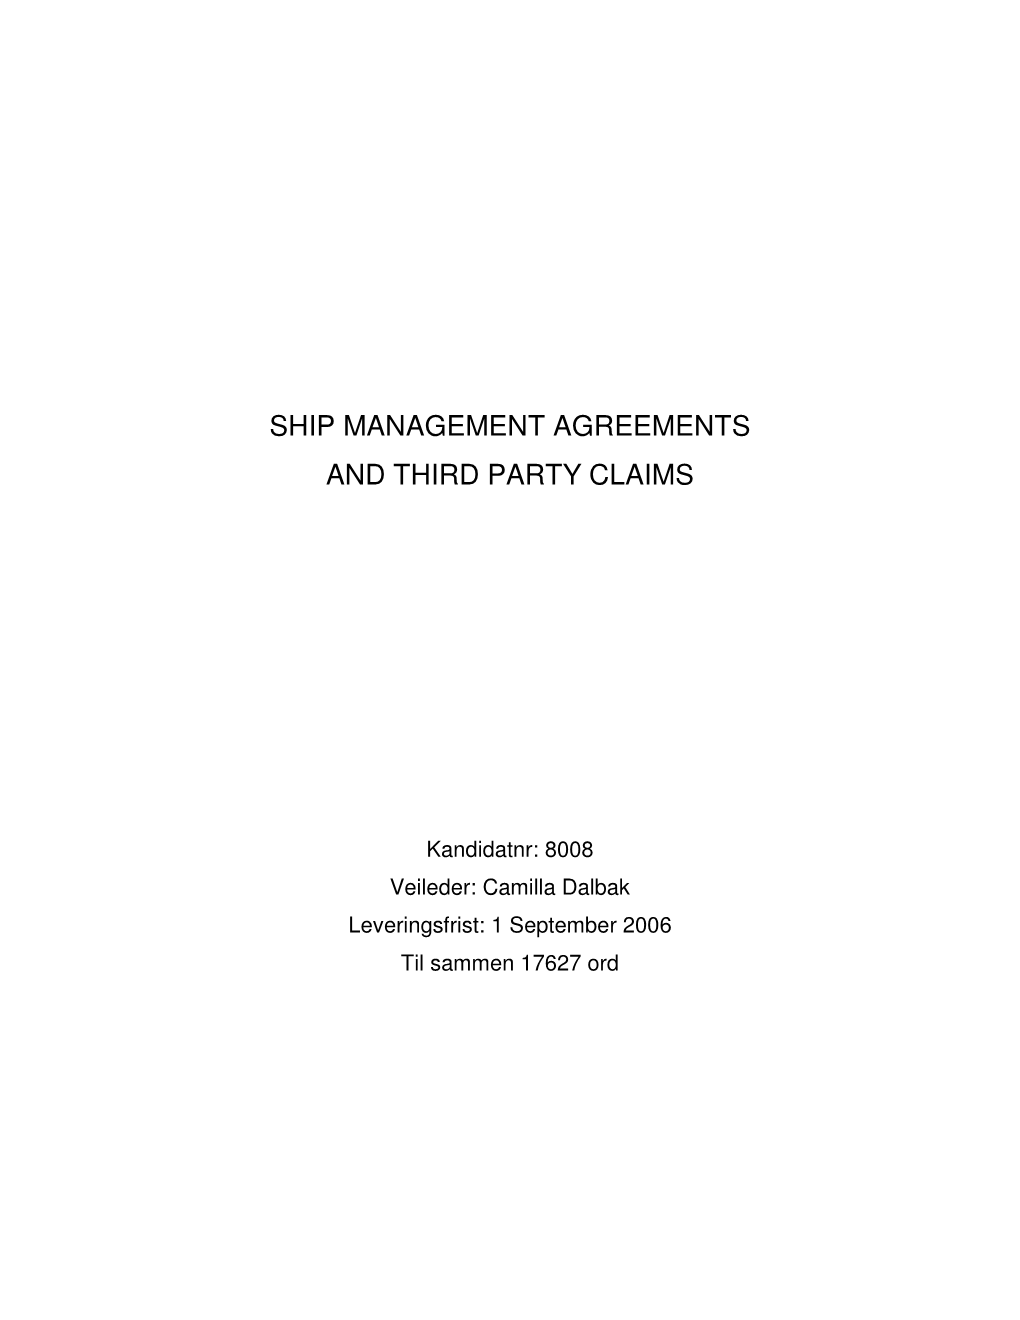 Ship Management Agreements and Third Party Claims